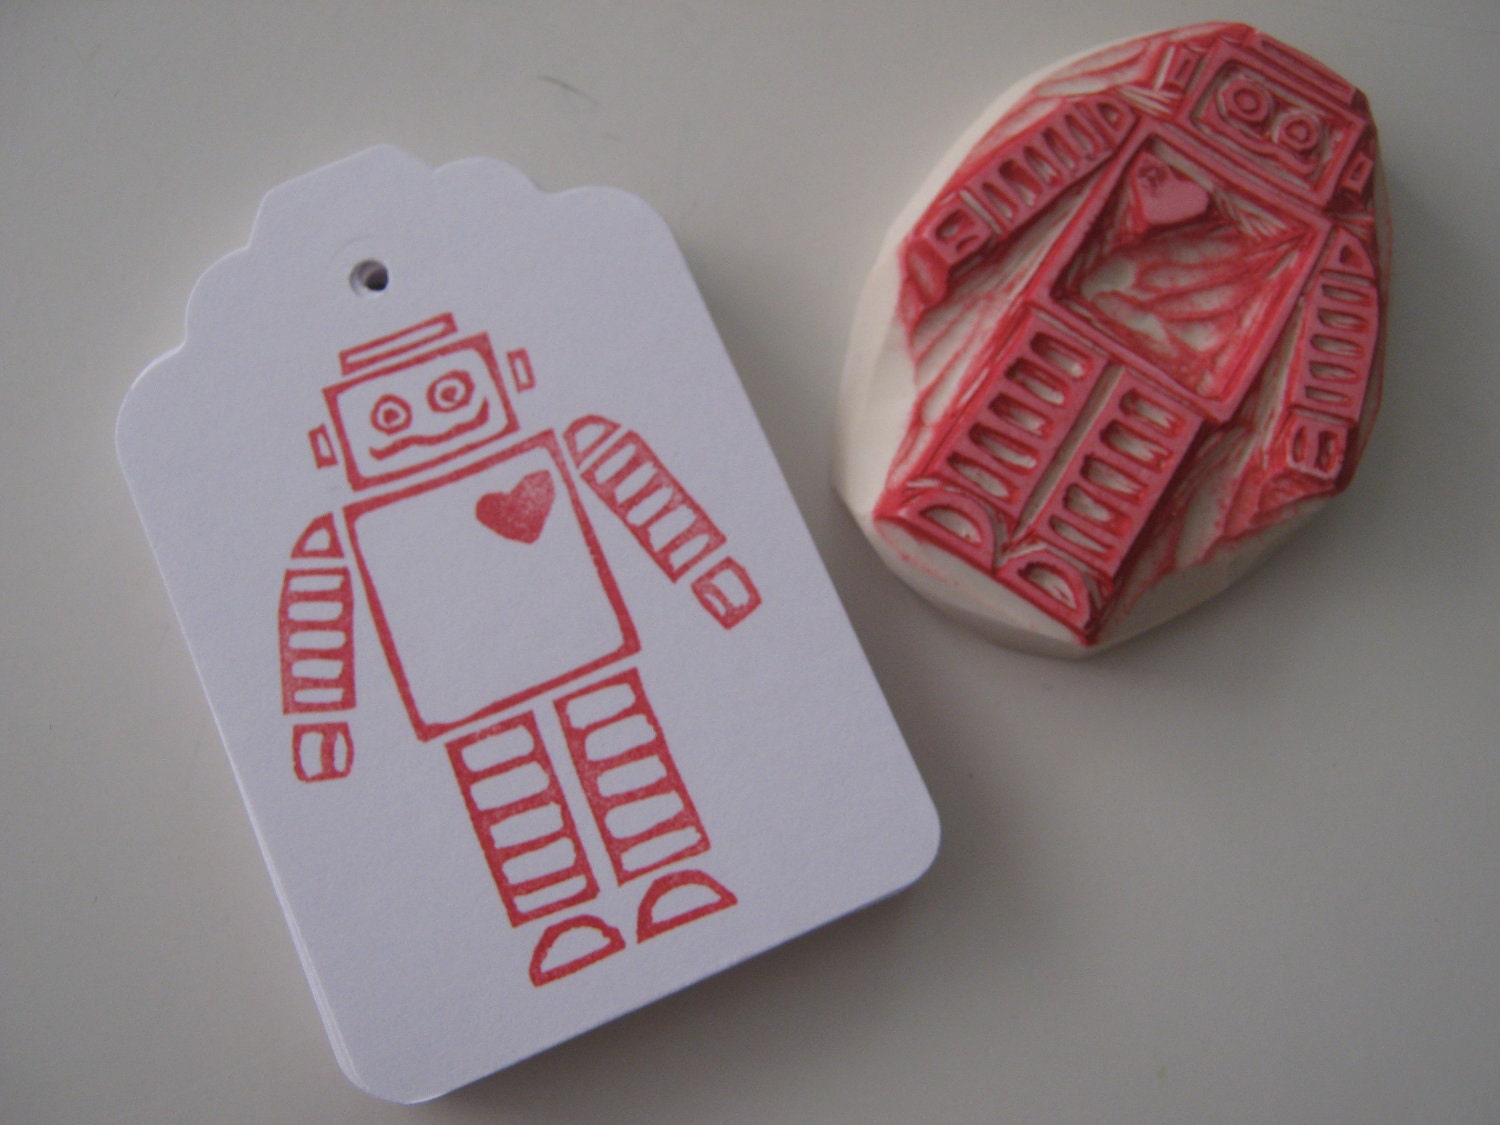 Hand Stamped Unique Robot Tags for Gift, Favors or Notes - Set of 12 - 2-1/2" x 1-3/4"